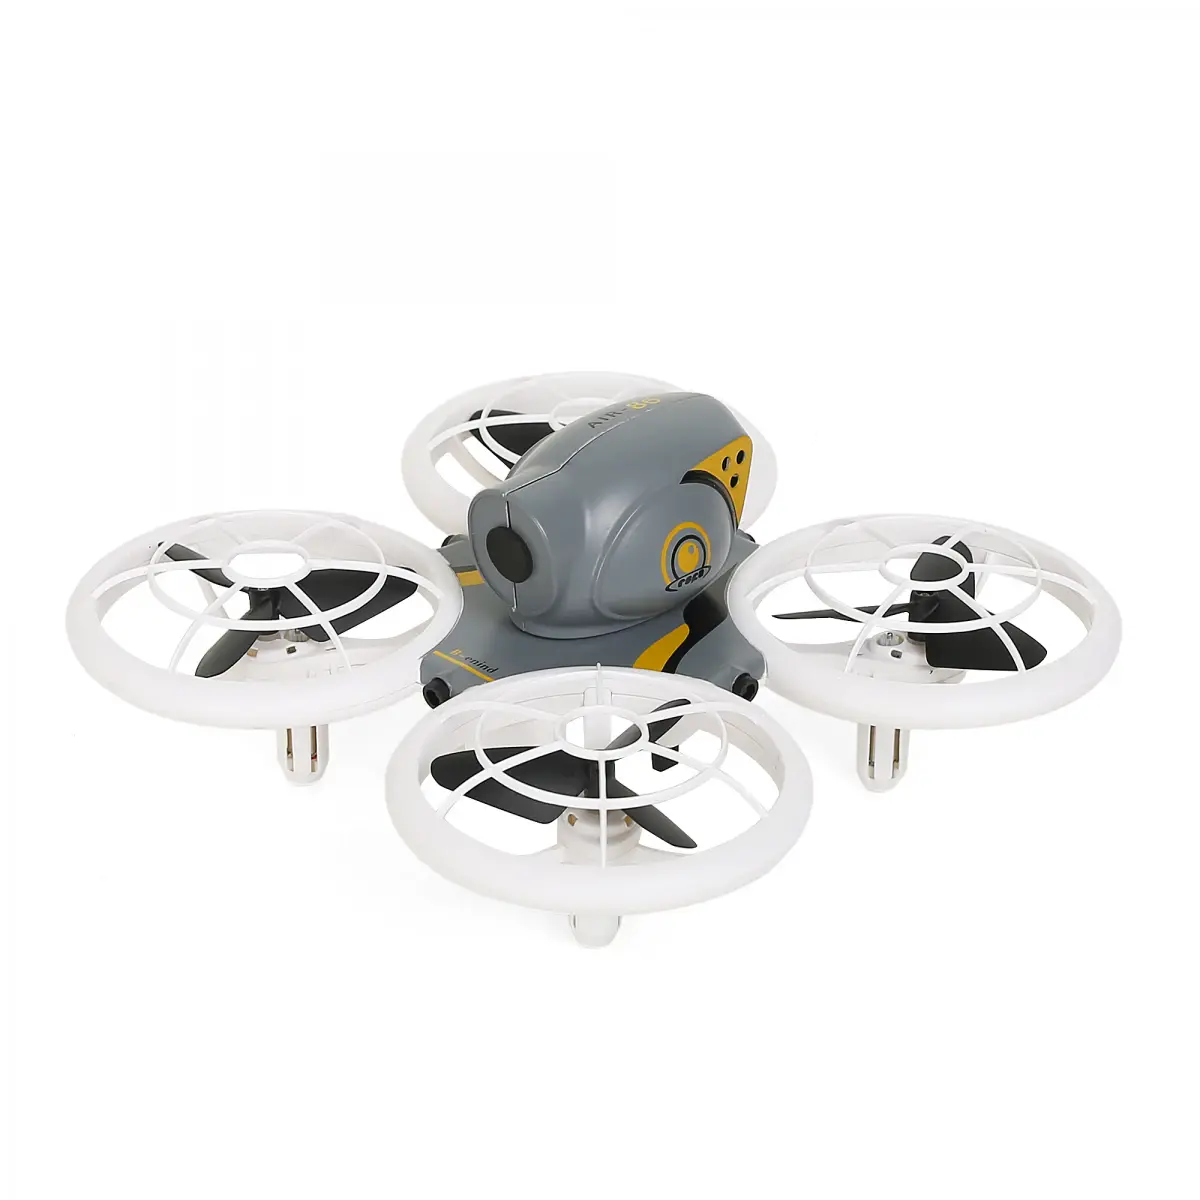 Ralleyz Dazzling Drone with LED Lights, 14Y+, White